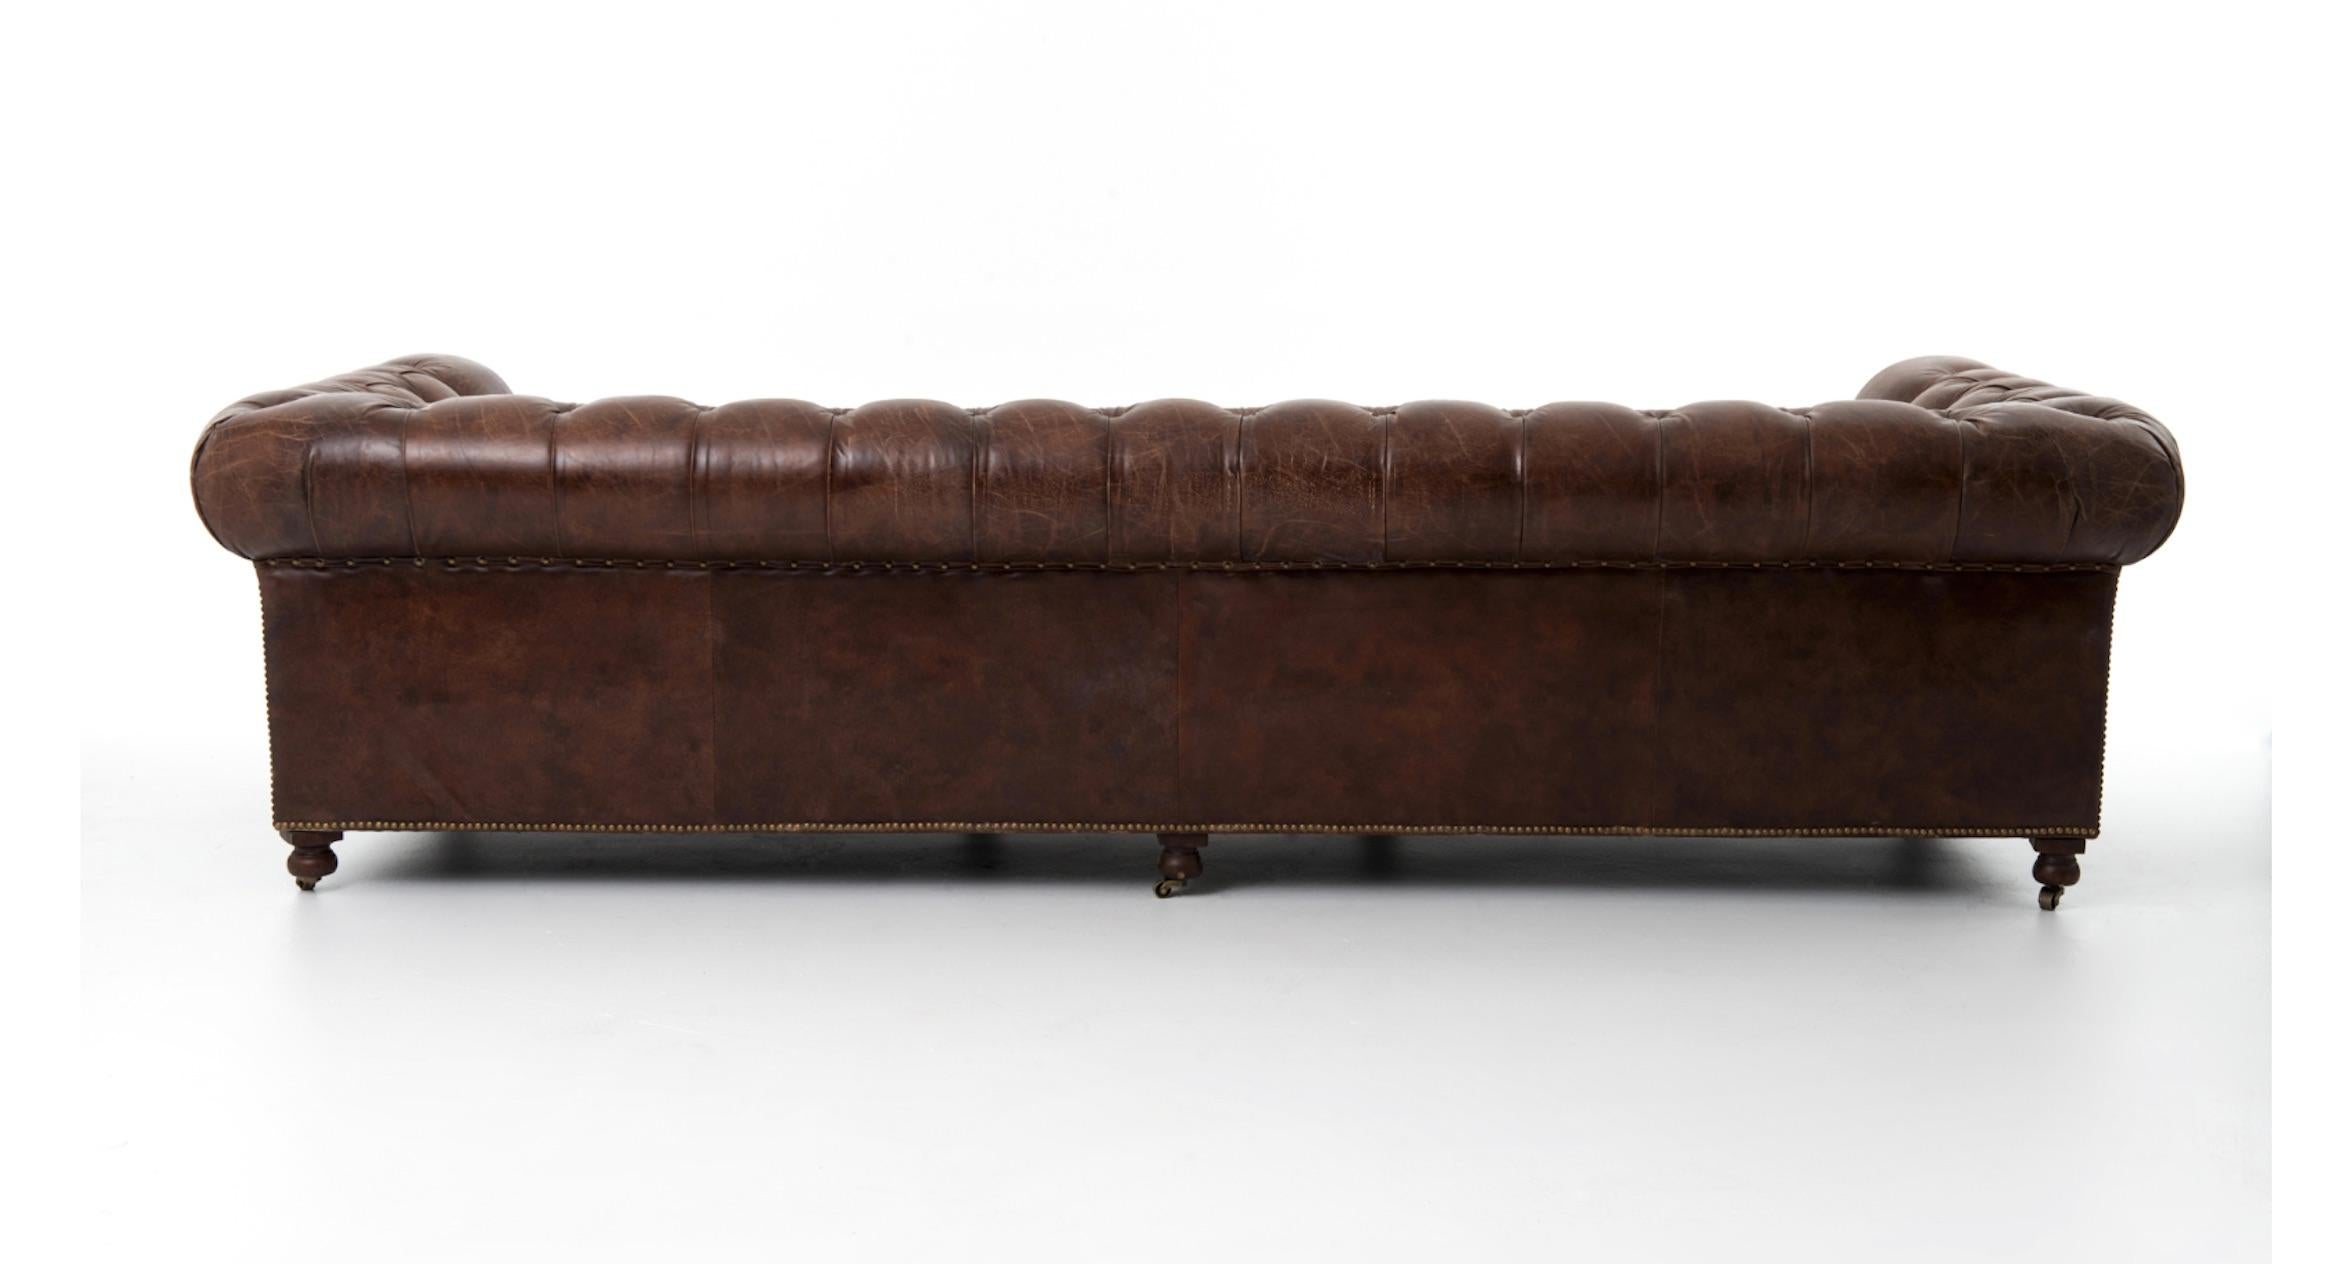 Pair of Monumental Distressed Leather Chesterfield Sofas. Priced Per Sofa. 1